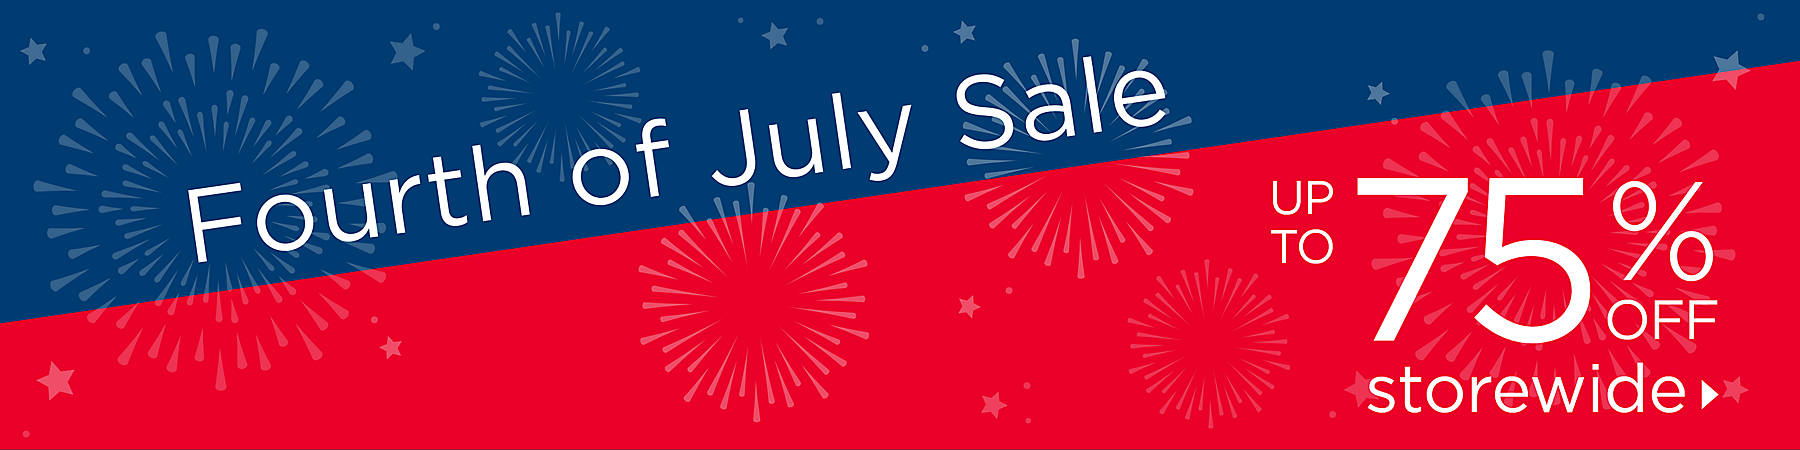 Fourth of July Sale Up to 75% Off Storewide